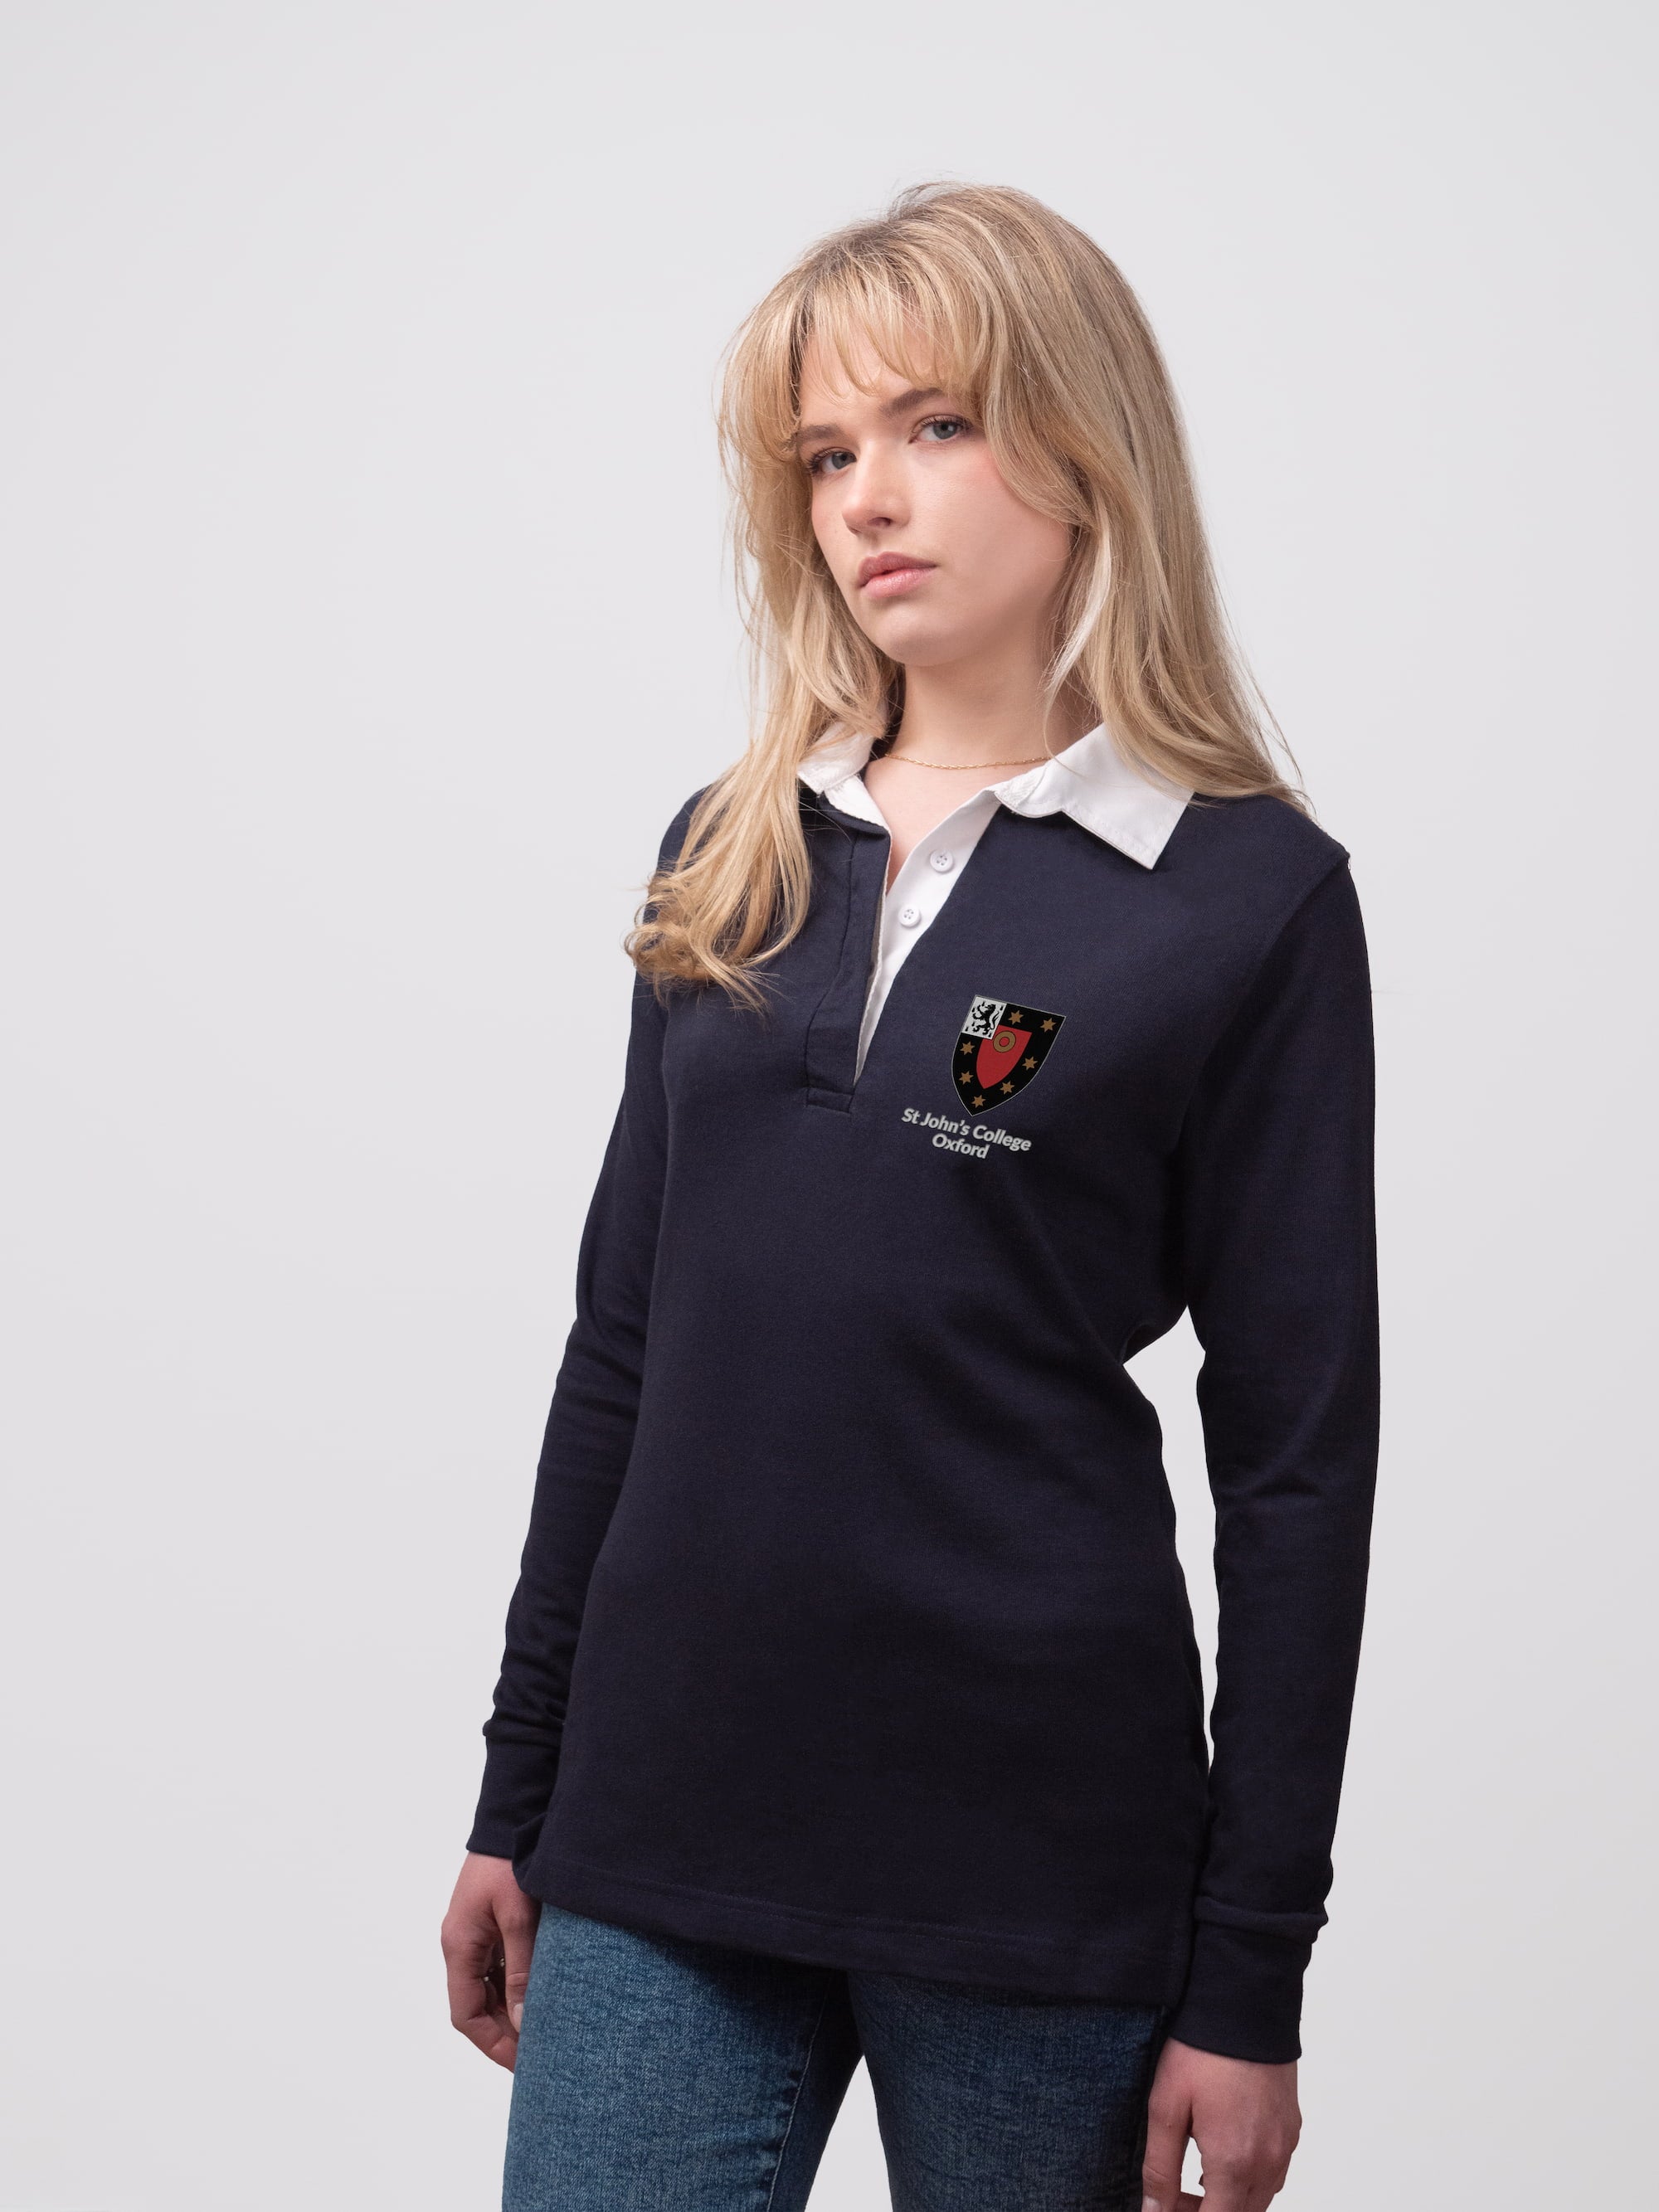 Student wearing a navy St John's College rugby shirt with embroidered crest